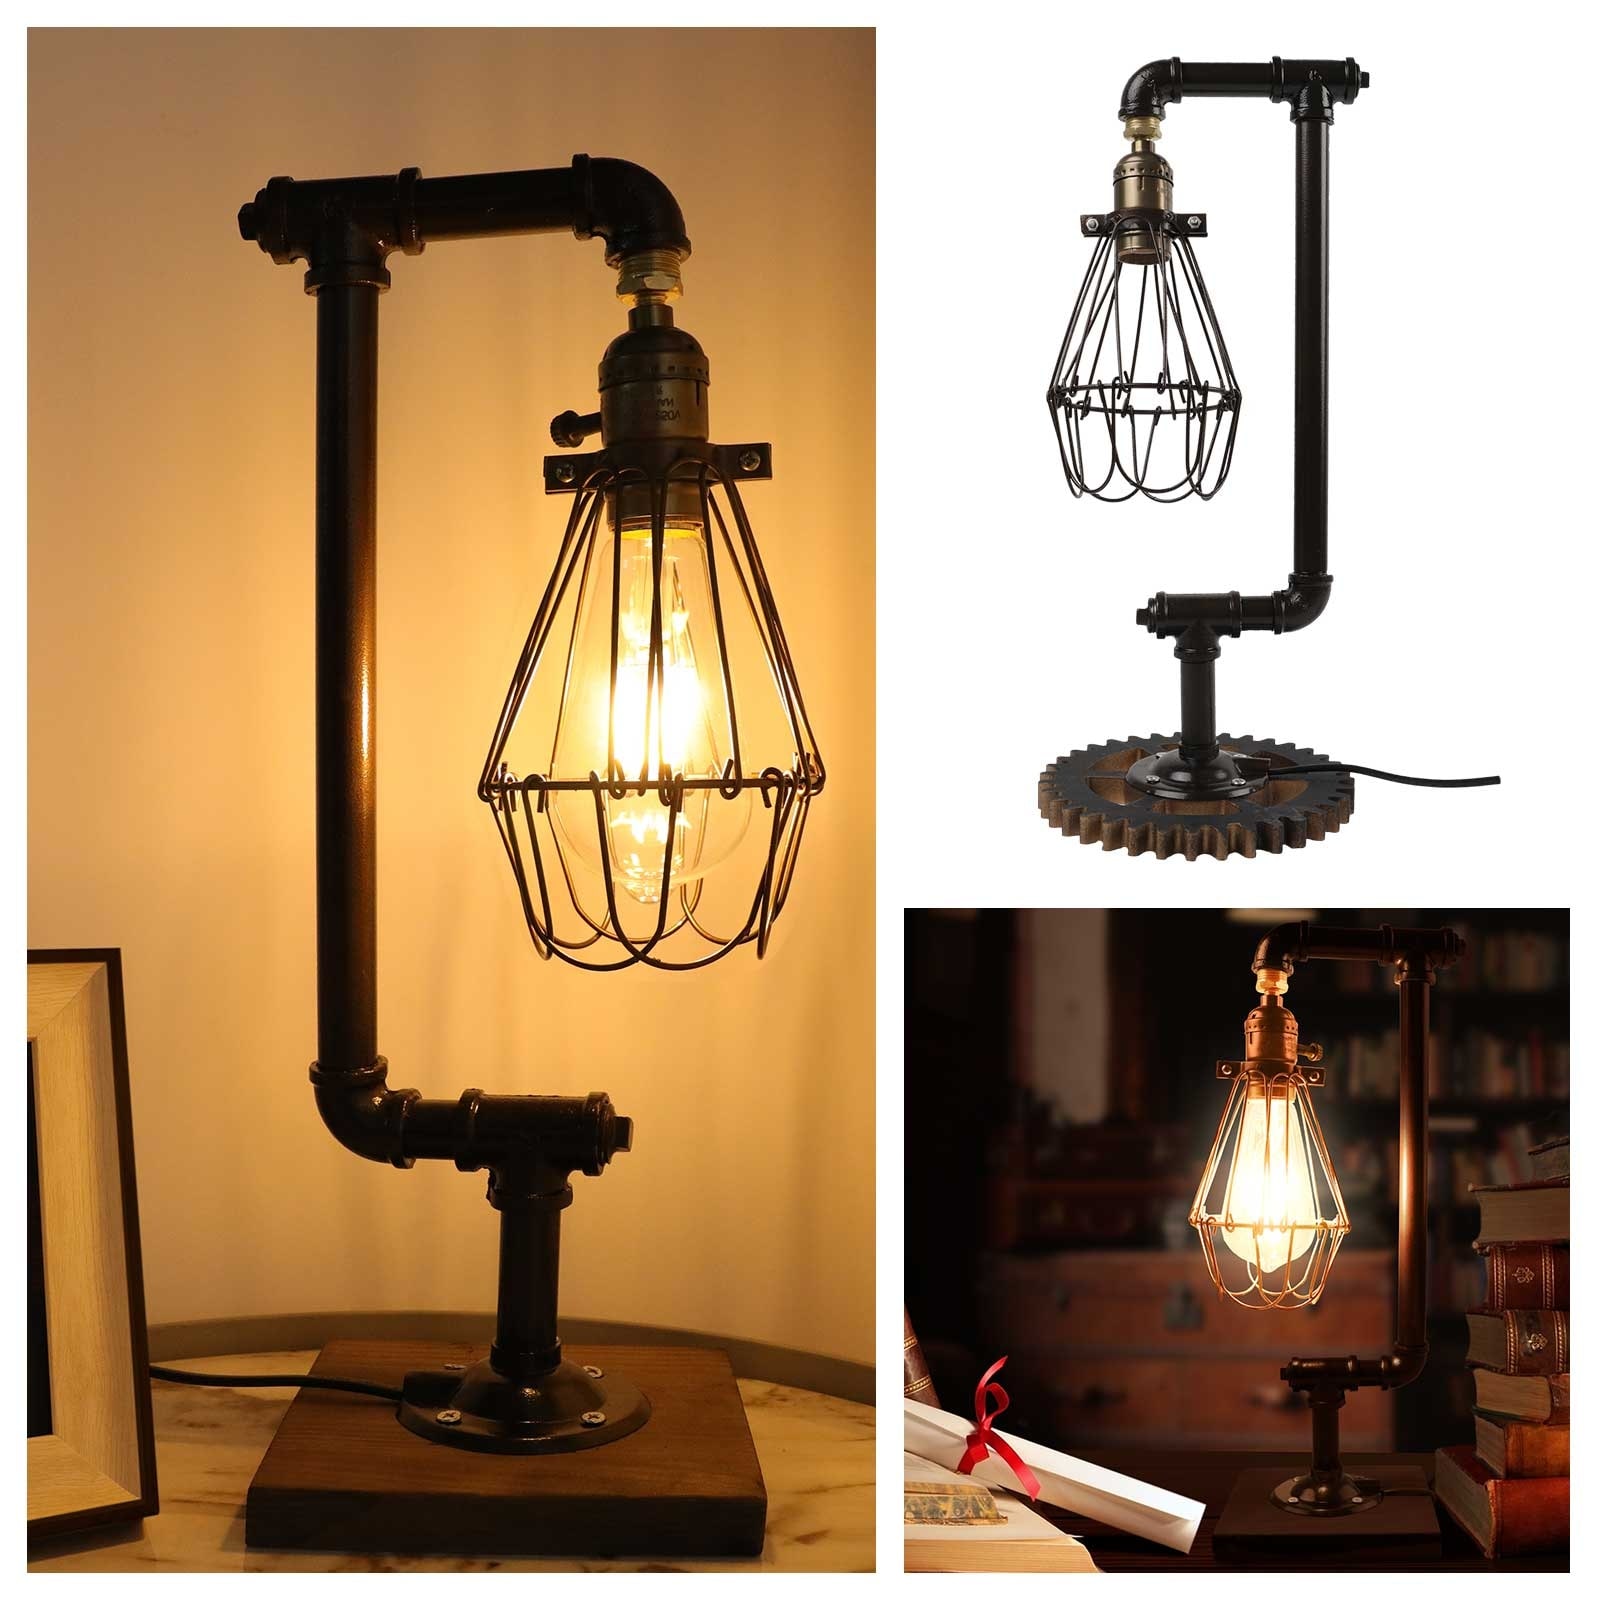 Rustic Industrial style Home Black Friday Special Desk,table lamp,steampunk 